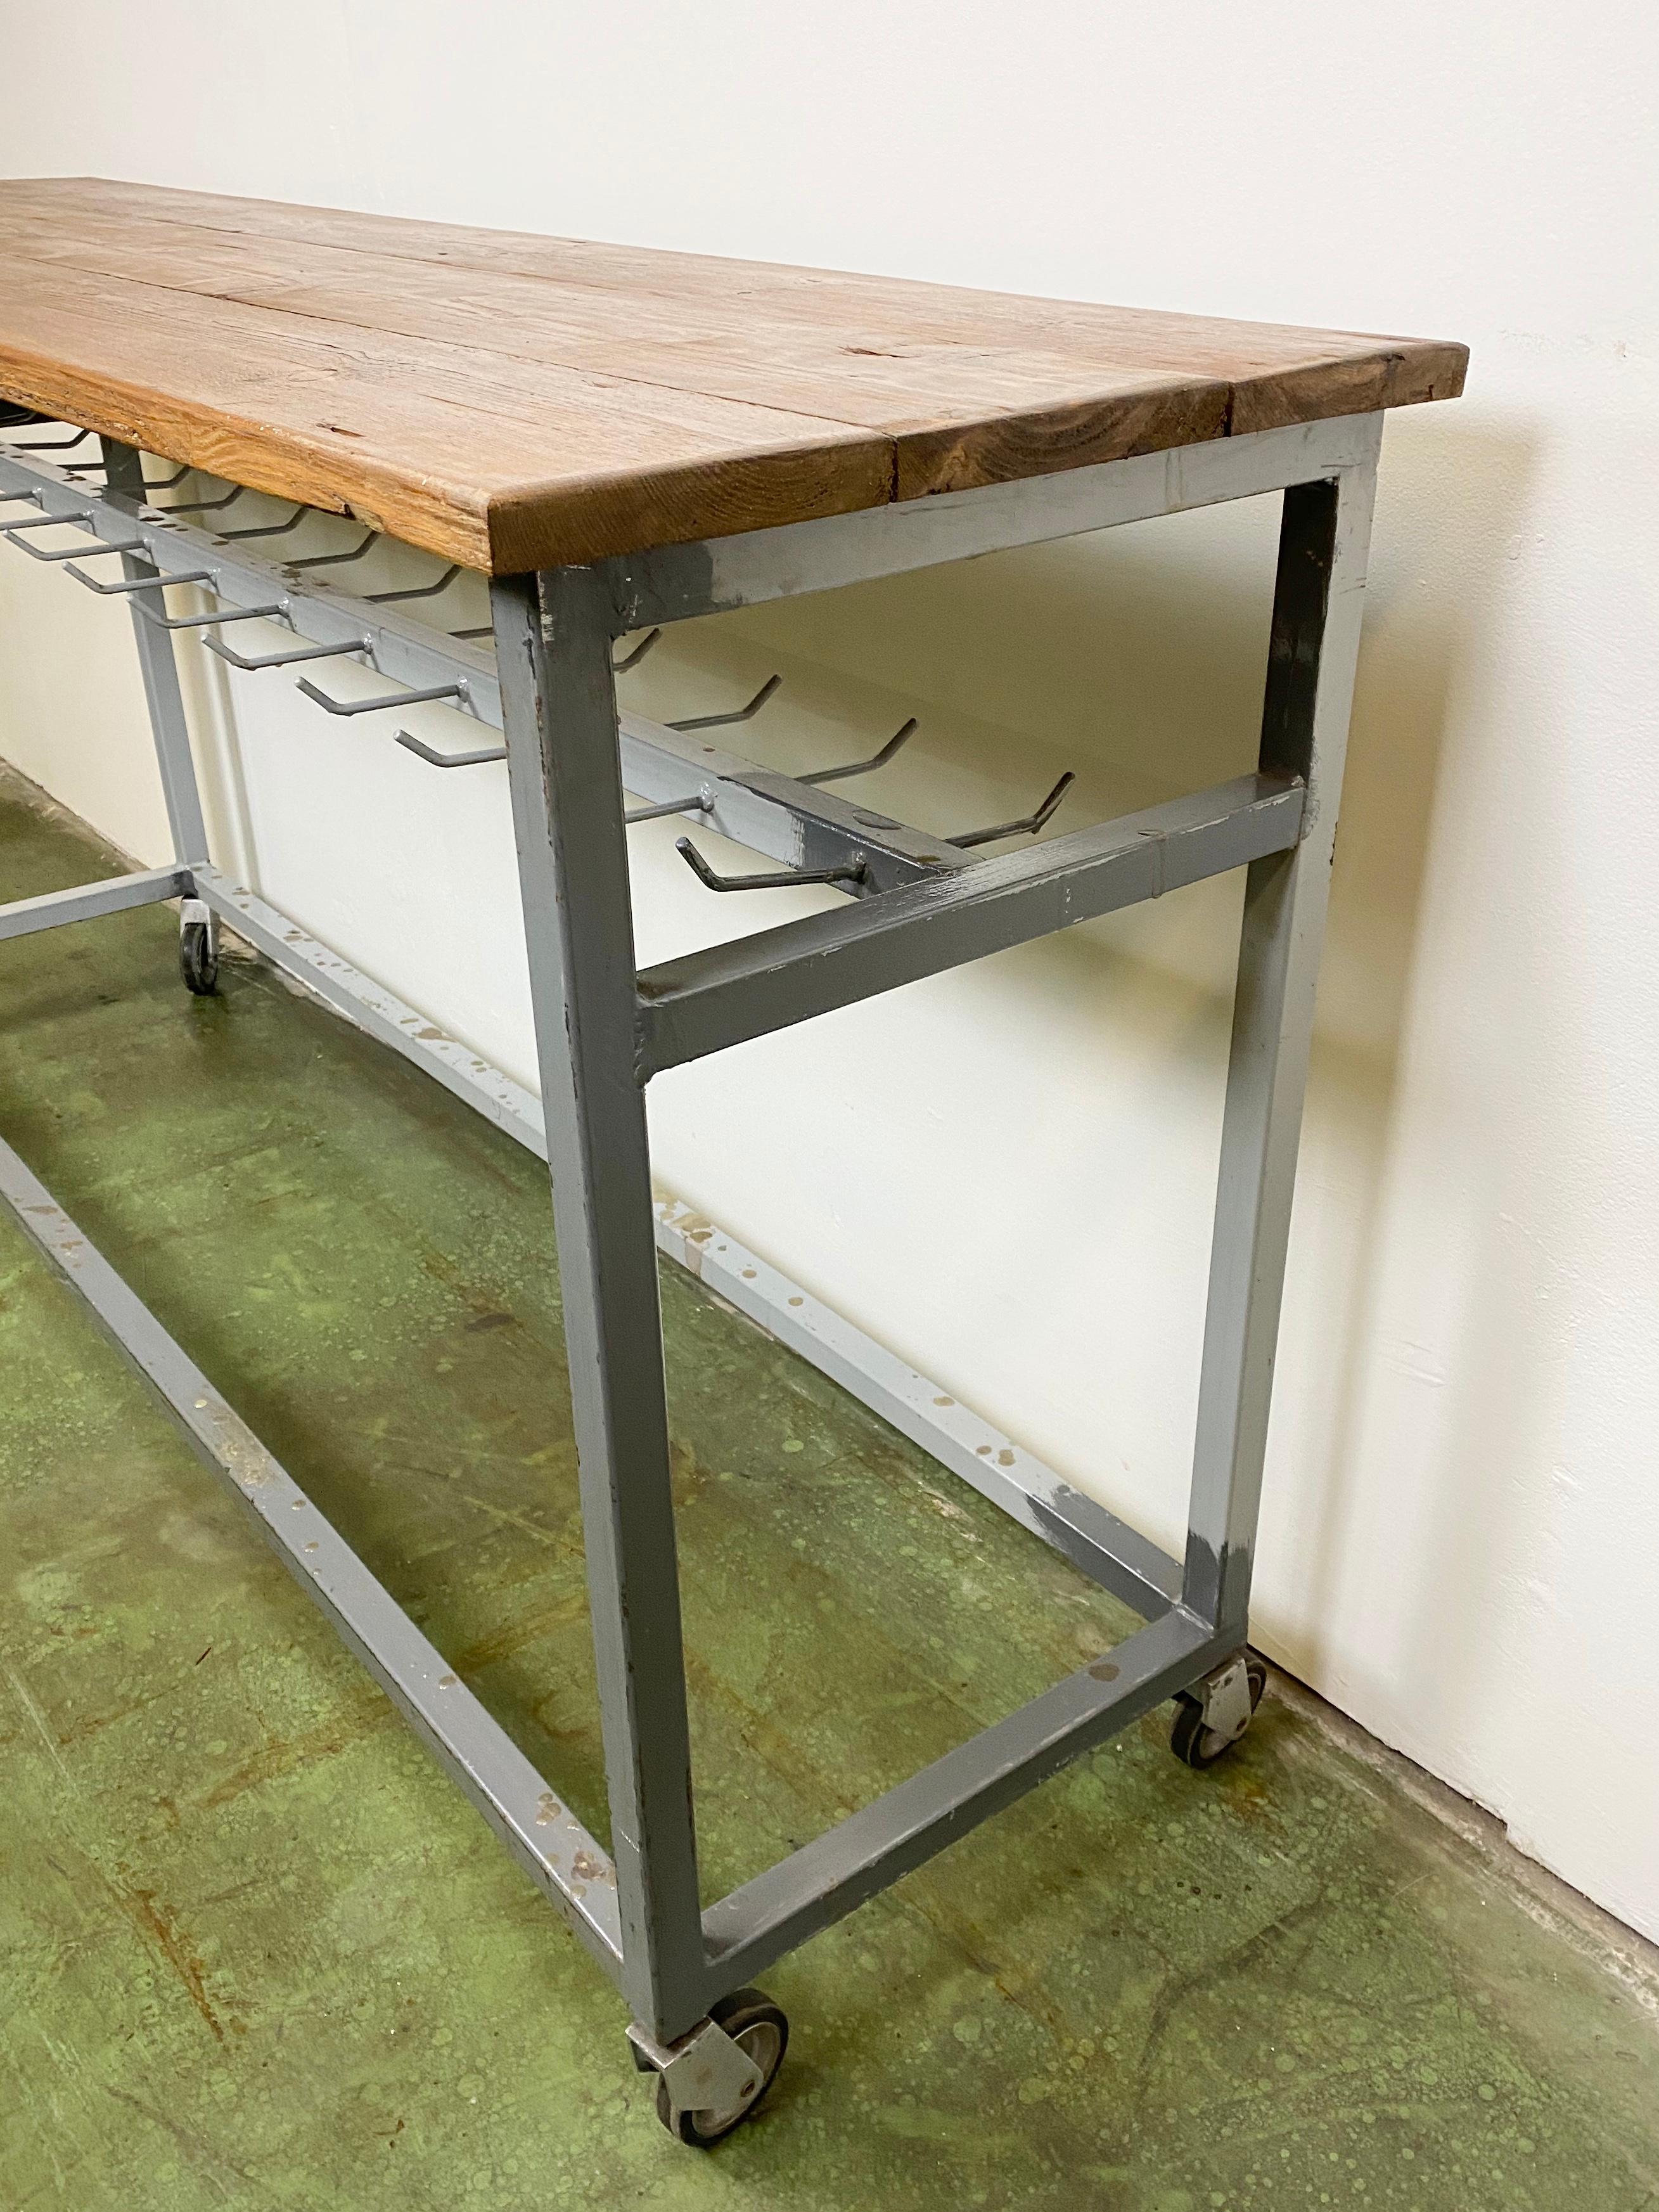 - Vintage industrial trolley with worktop
- Grey iron construction, solid wooden plate
- With original wheels
- Weight: 31 kg.